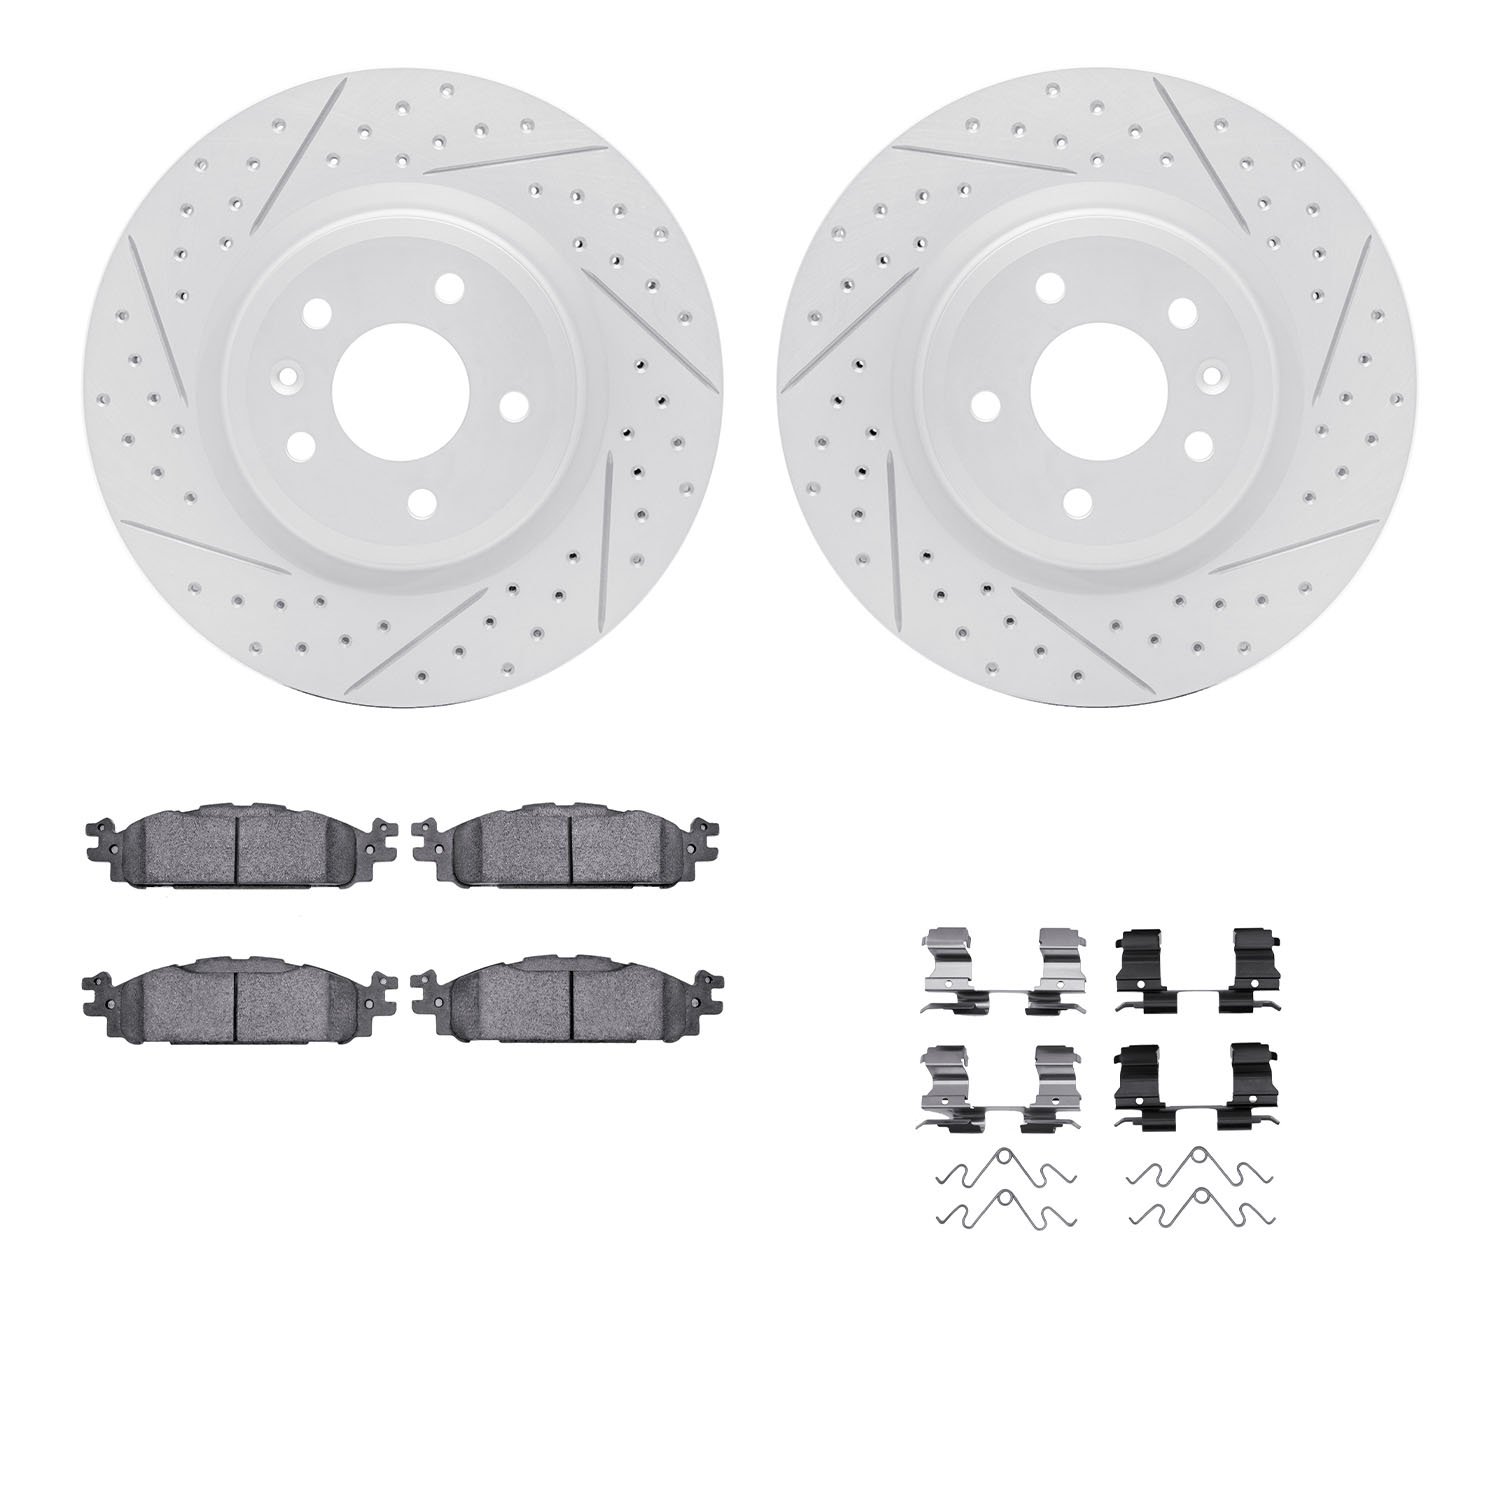 2212-54002 Geoperformance Drilled/Slotted Rotors w/Heavy-Duty Pads Kit & Hardware, 2009-2010 Ford/Lincoln/Mercury/Mazda, Positio